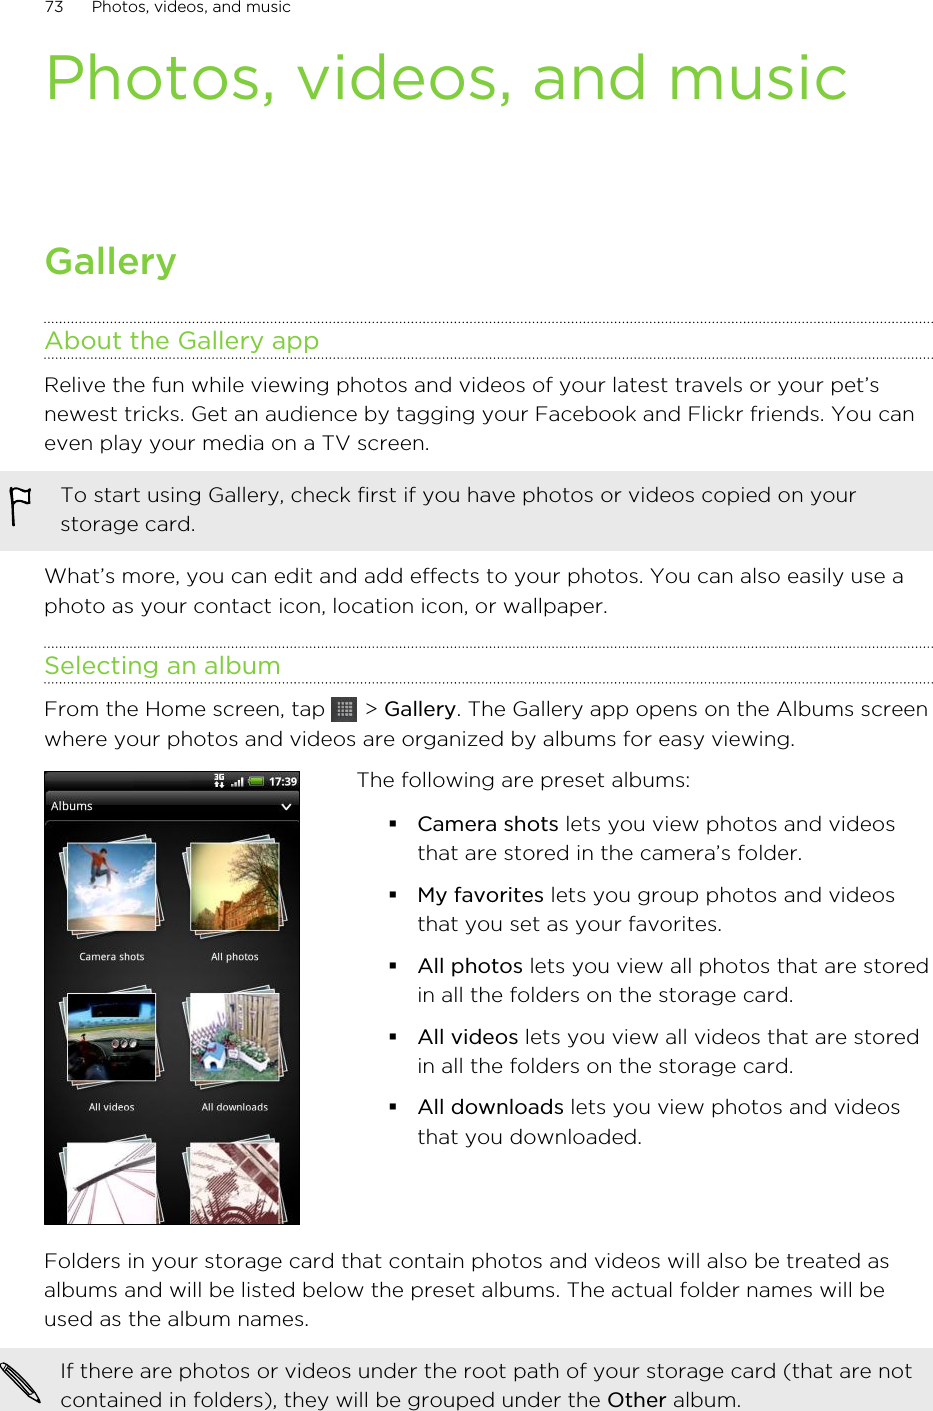 Photos, videos, and musicGalleryAbout the Gallery appRelive the fun while viewing photos and videos of your latest travels or your pet’snewest tricks. Get an audience by tagging your Facebook and Flickr friends. You caneven play your media on a TV screen.To start using Gallery, check first if you have photos or videos copied on yourstorage card.What’s more, you can edit and add effects to your photos. You can also easily use aphoto as your contact icon, location icon, or wallpaper.Selecting an albumFrom the Home screen, tap   &gt; Gallery. The Gallery app opens on the Albums screenwhere your photos and videos are organized by albums for easy viewing.The following are preset albums:§Camera shots lets you view photos and videosthat are stored in the camera’s folder.§My favorites lets you group photos and videosthat you set as your favorites.§All photos lets you view all photos that are storedin all the folders on the storage card.§All videos lets you view all videos that are storedin all the folders on the storage card.§All downloads lets you view photos and videosthat you downloaded.Folders in your storage card that contain photos and videos will also be treated asalbums and will be listed below the preset albums. The actual folder names will beused as the album names.If there are photos or videos under the root path of your storage card (that are notcontained in folders), they will be grouped under the Other album.73 Photos, videos, and music